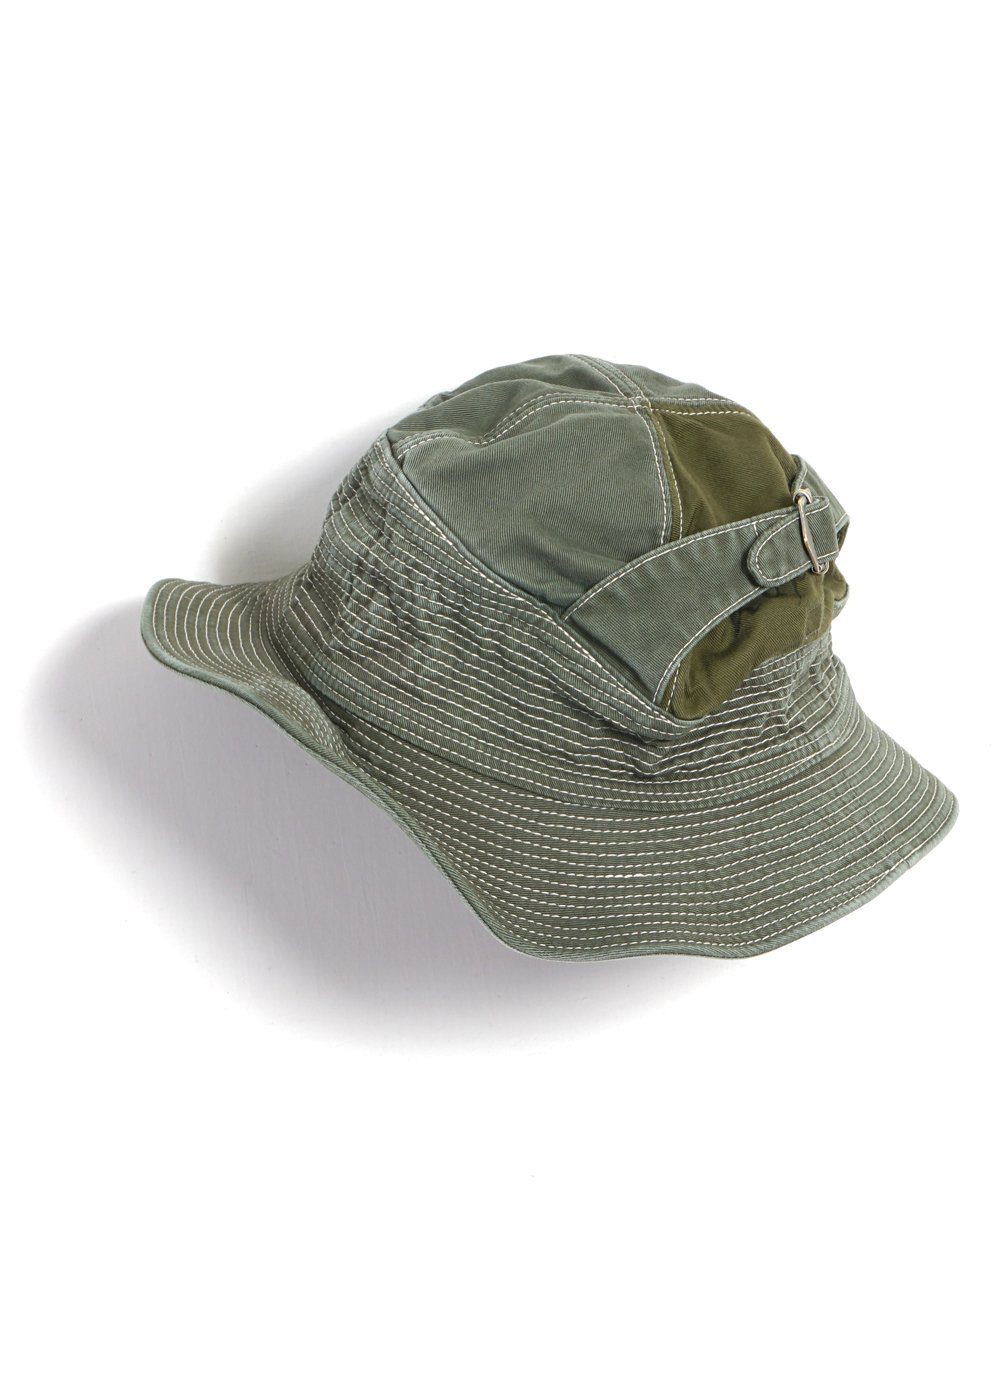 SOLD OUT - THE OLD MAN AND THE SEA | Chino Hat | Khaki - HANSEN Garments